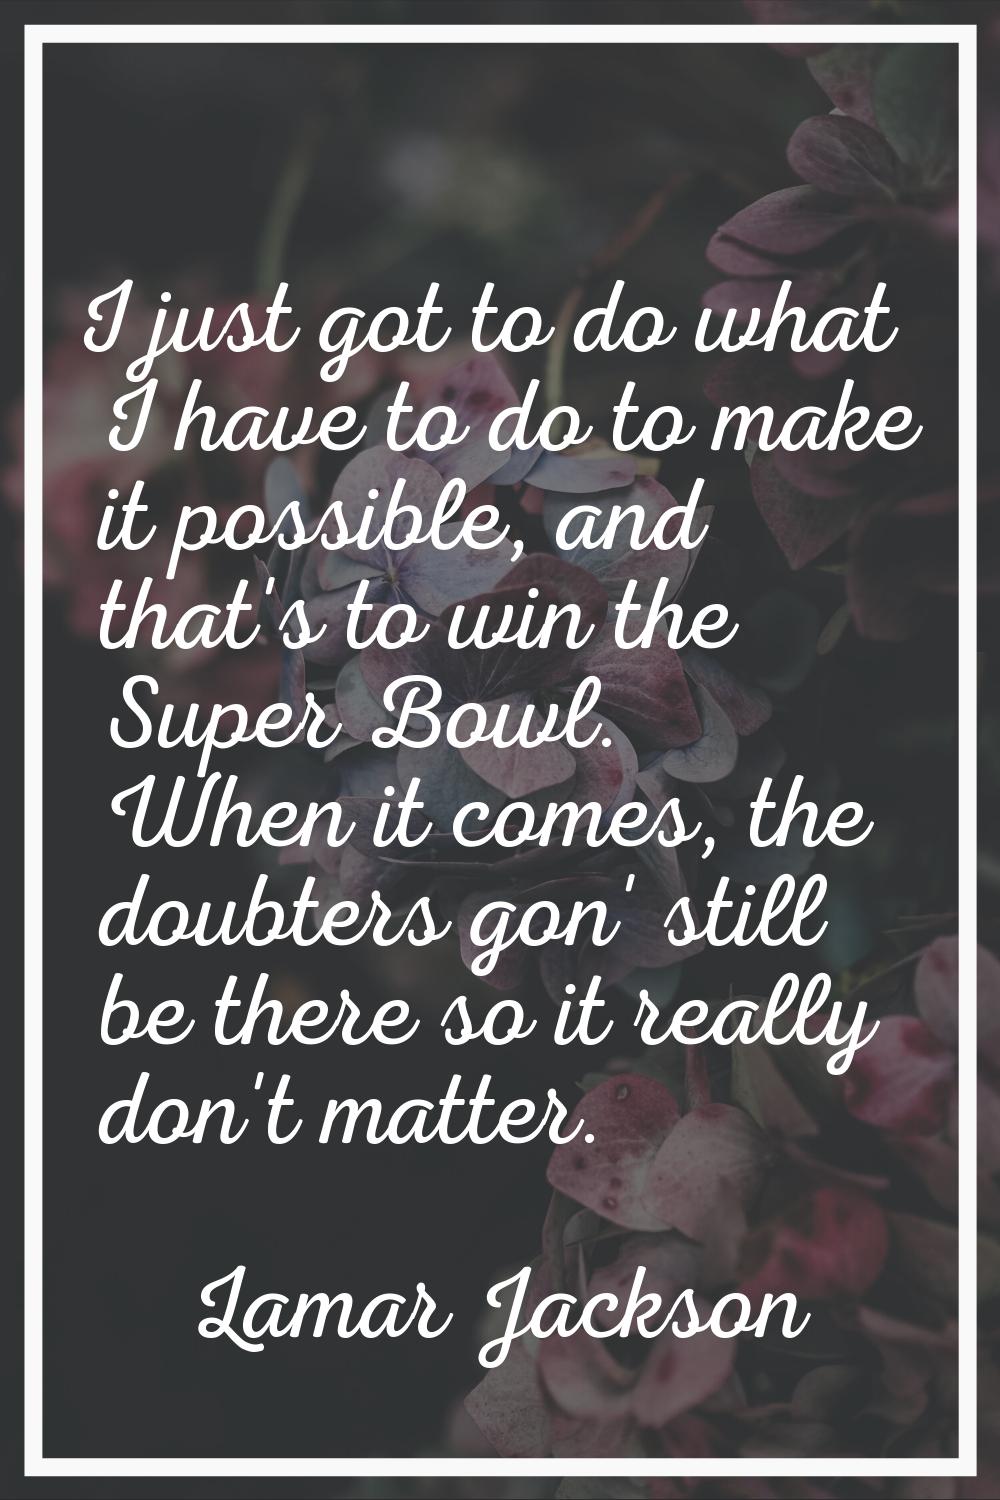 I just got to do what I have to do to make it possible, and that's to win the Super Bowl. When it c